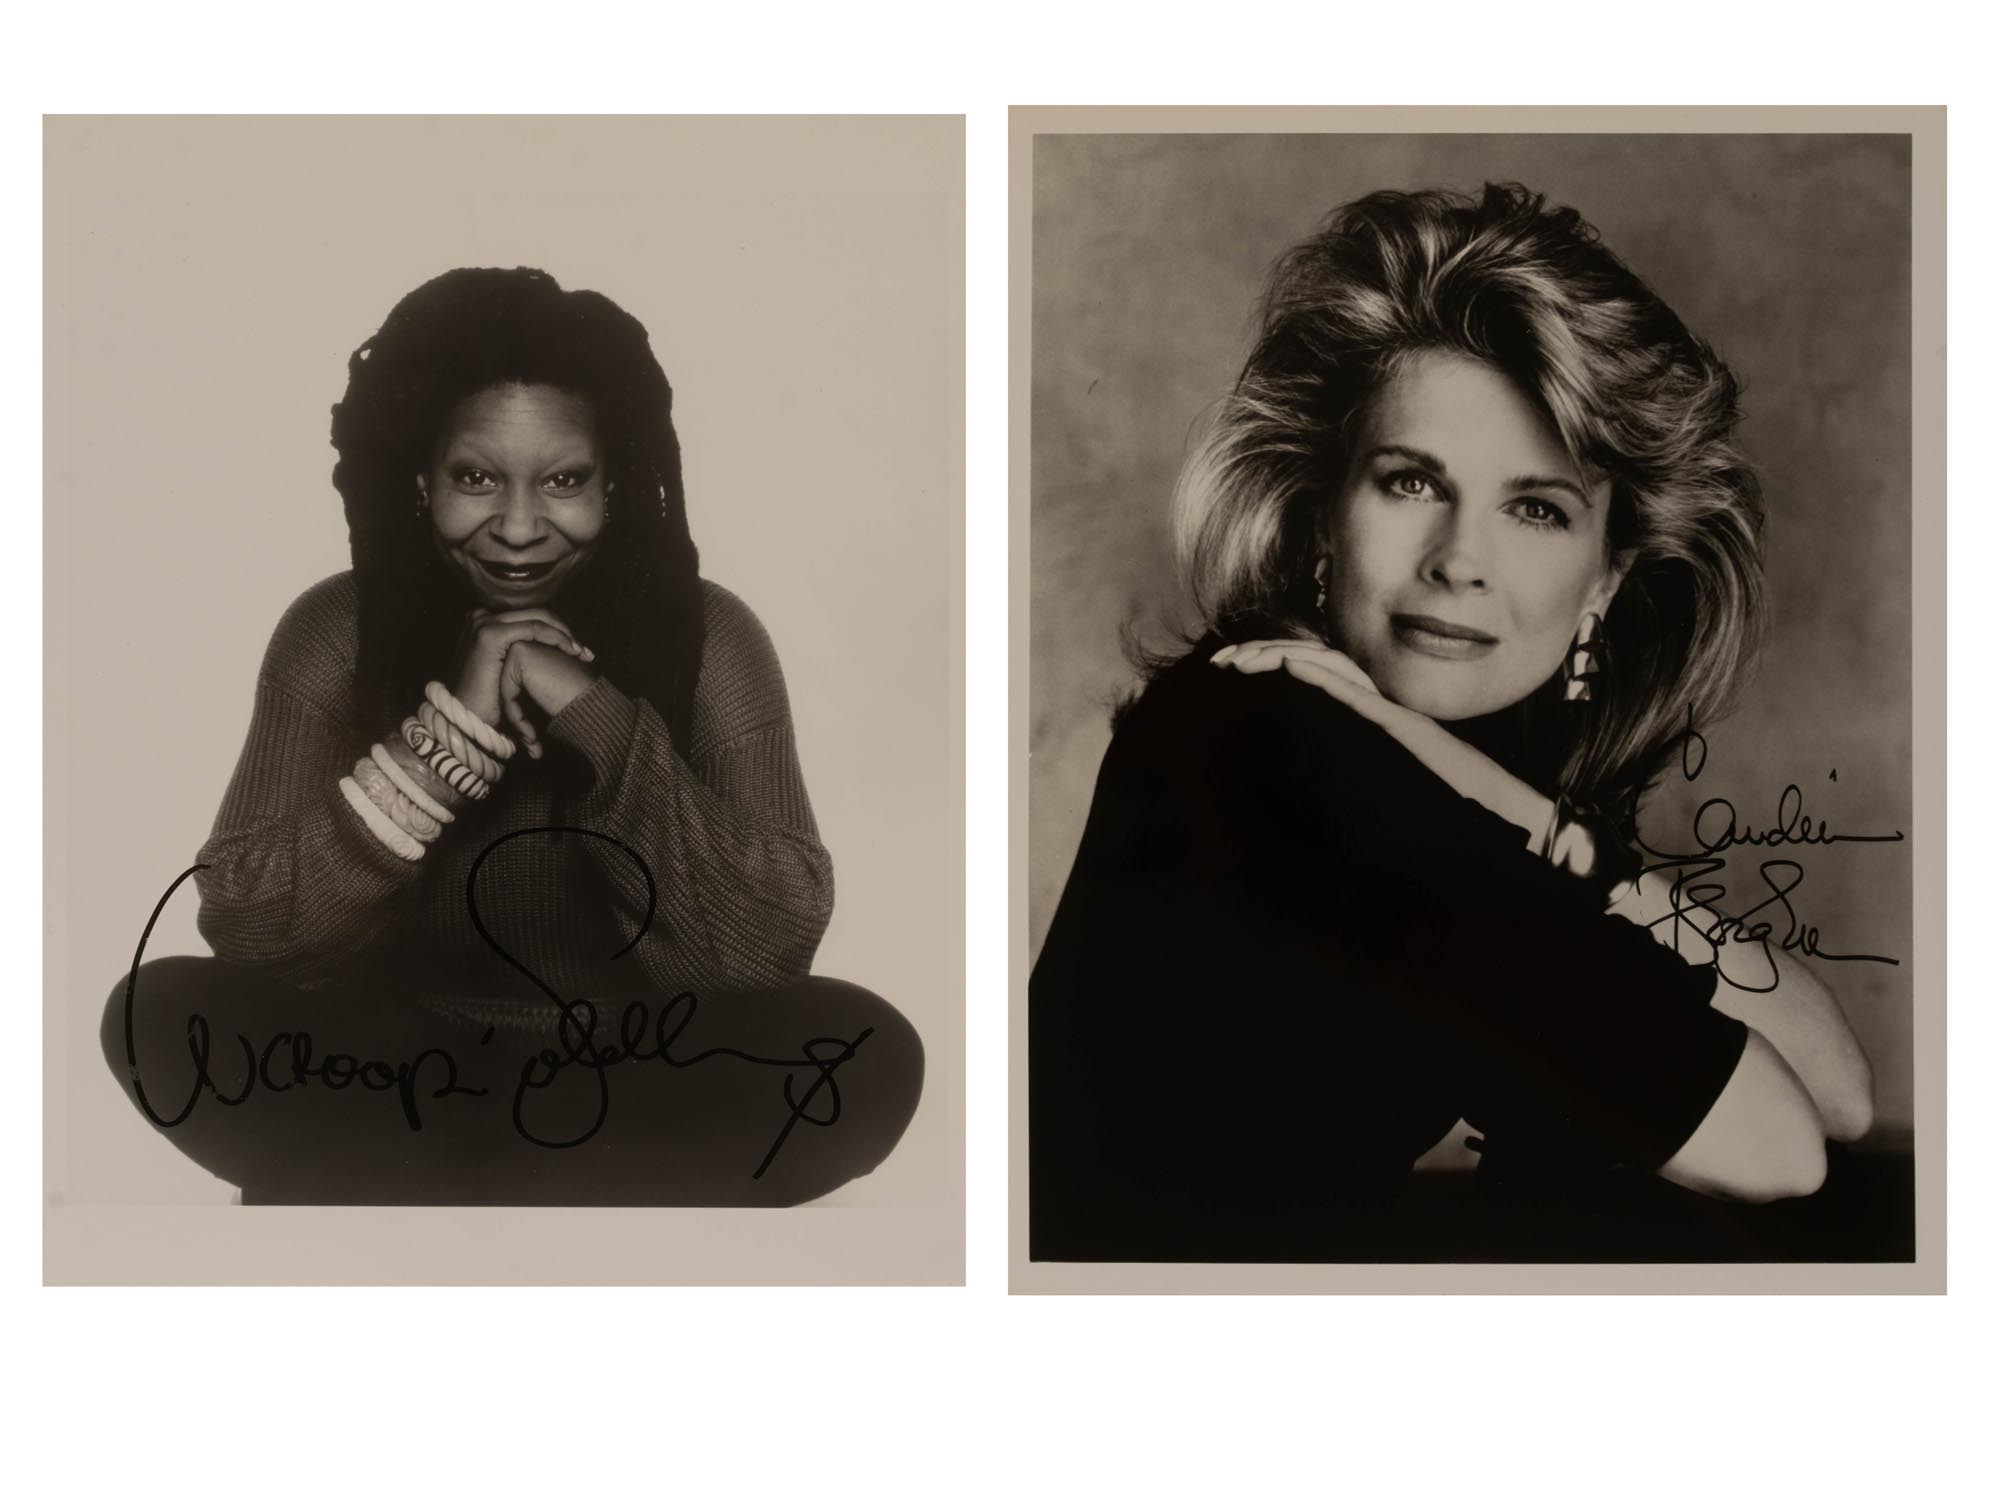 WHOOPI GOLDBERG AND OTHER ACTRESSES AUTOGRAPHS PIC-2